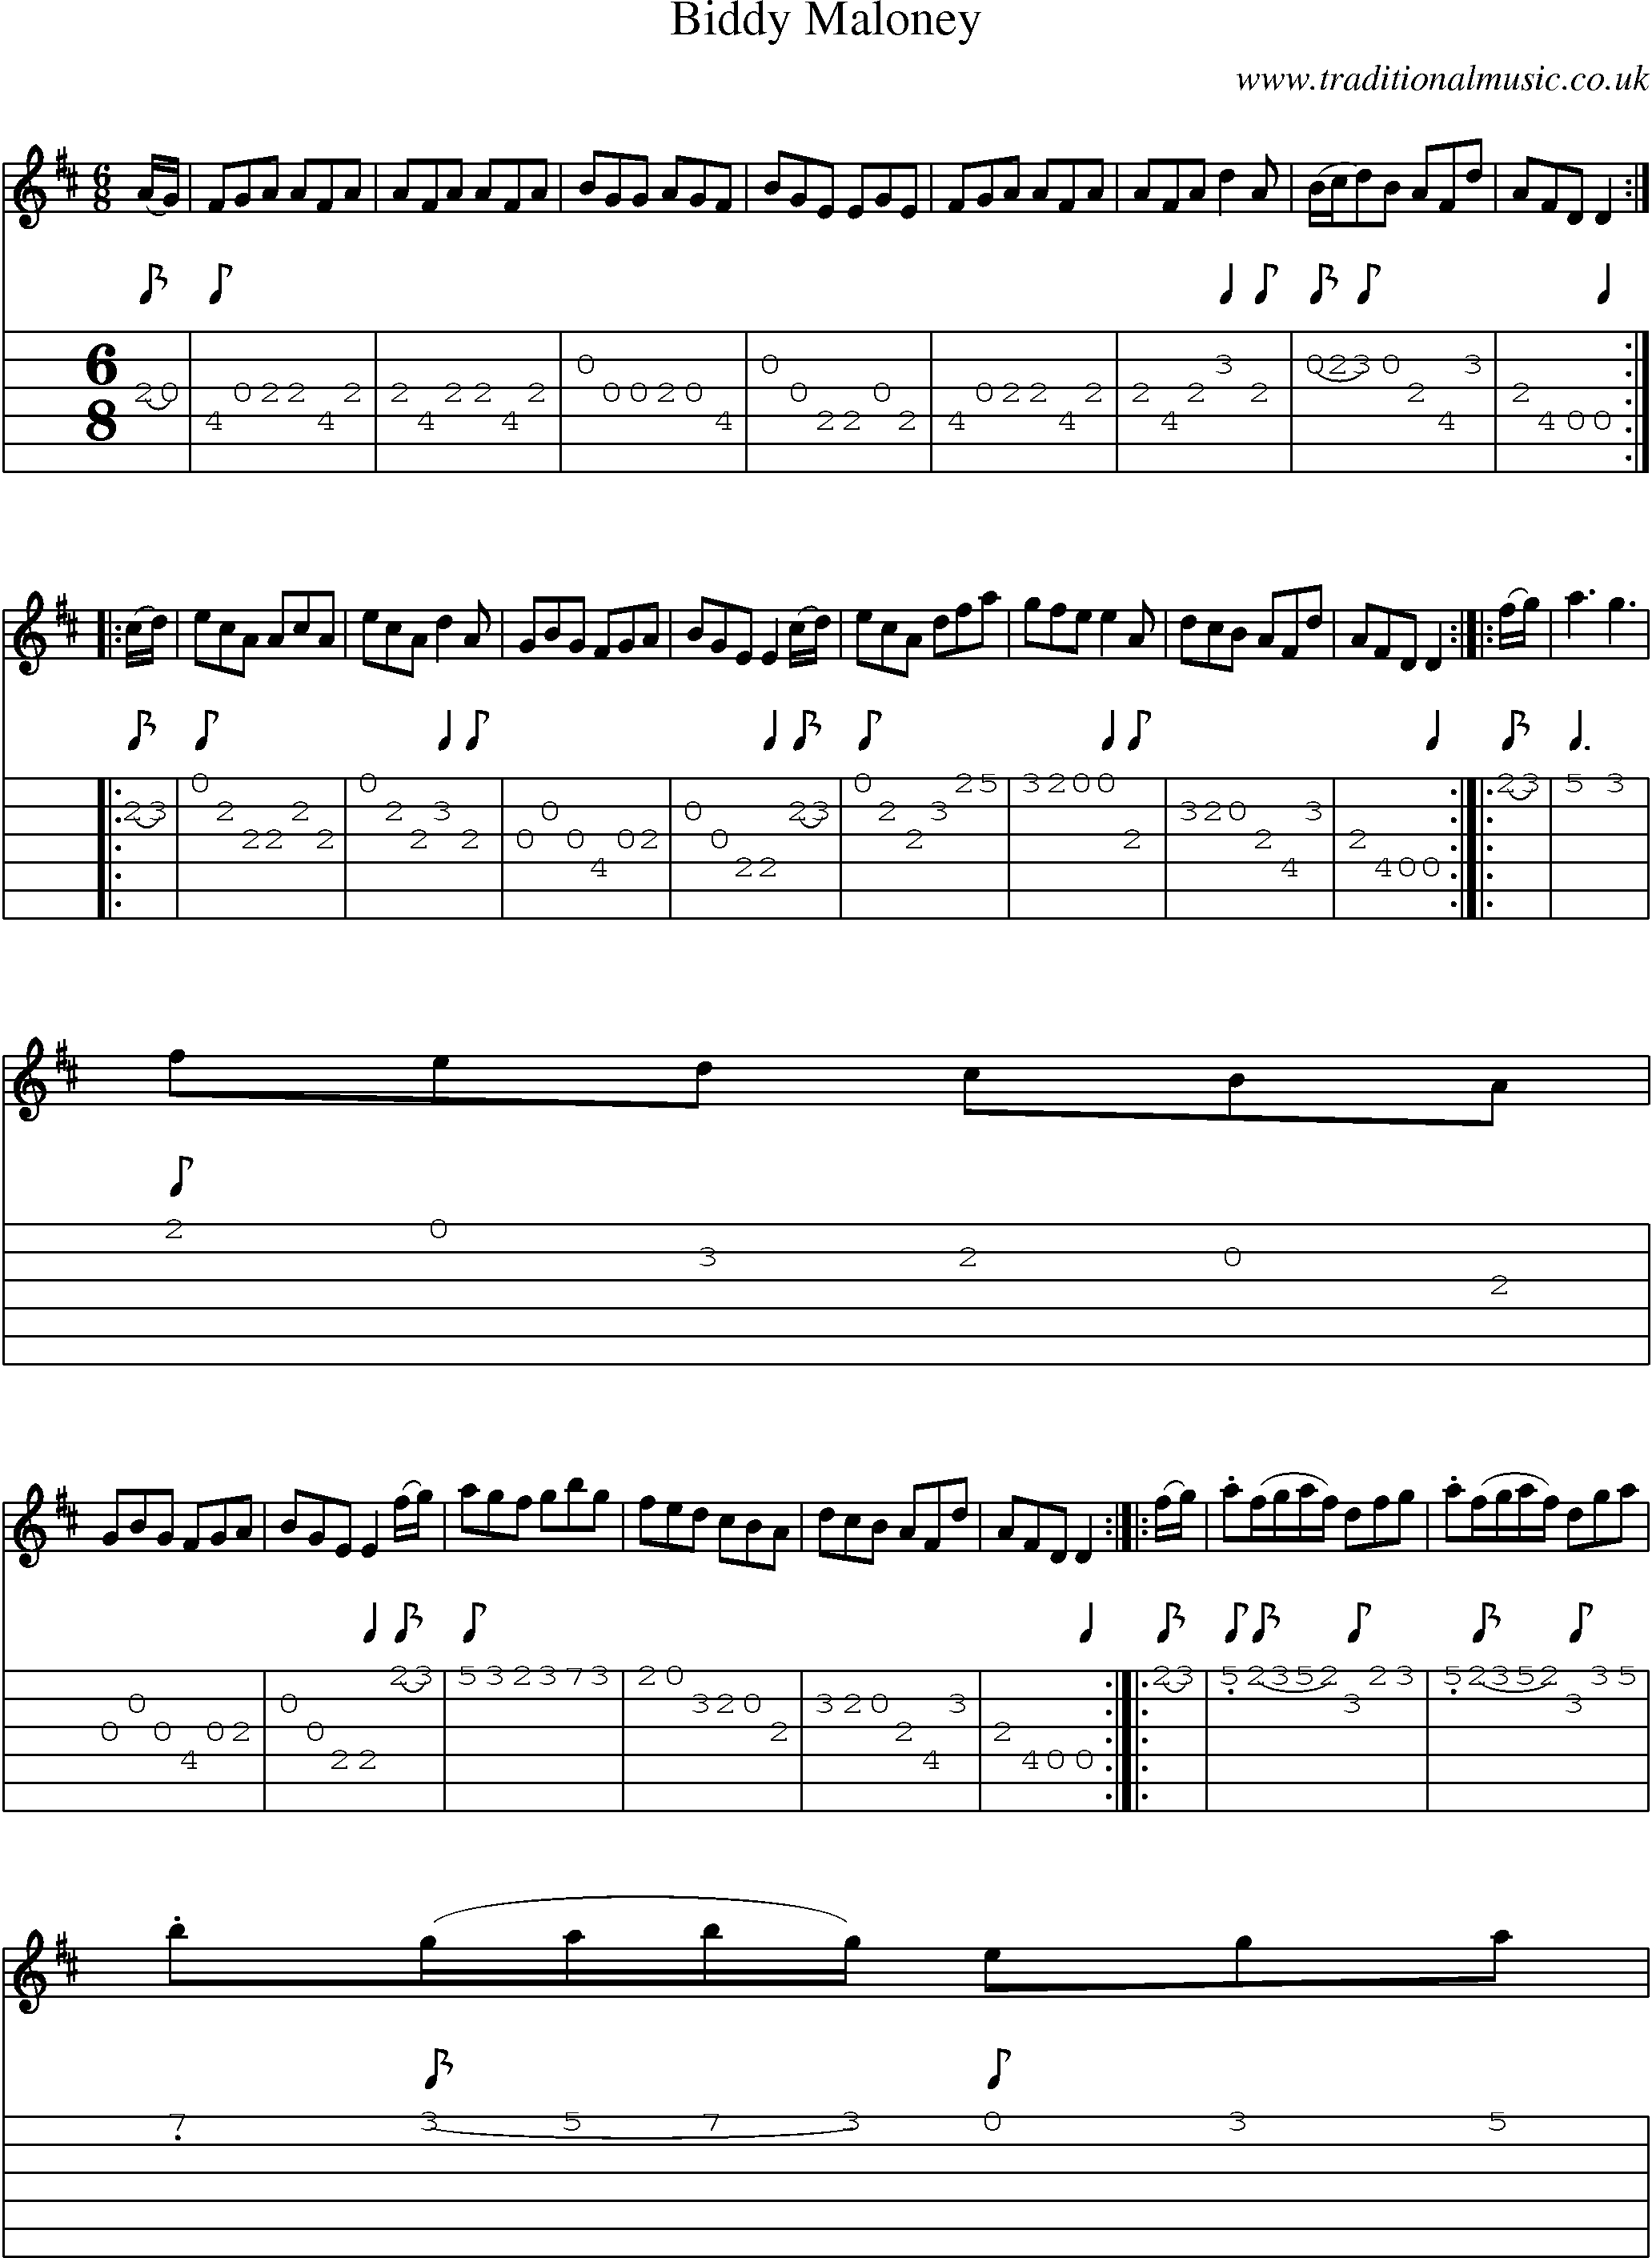 Music Score and Guitar Tabs for Biddy Maloney